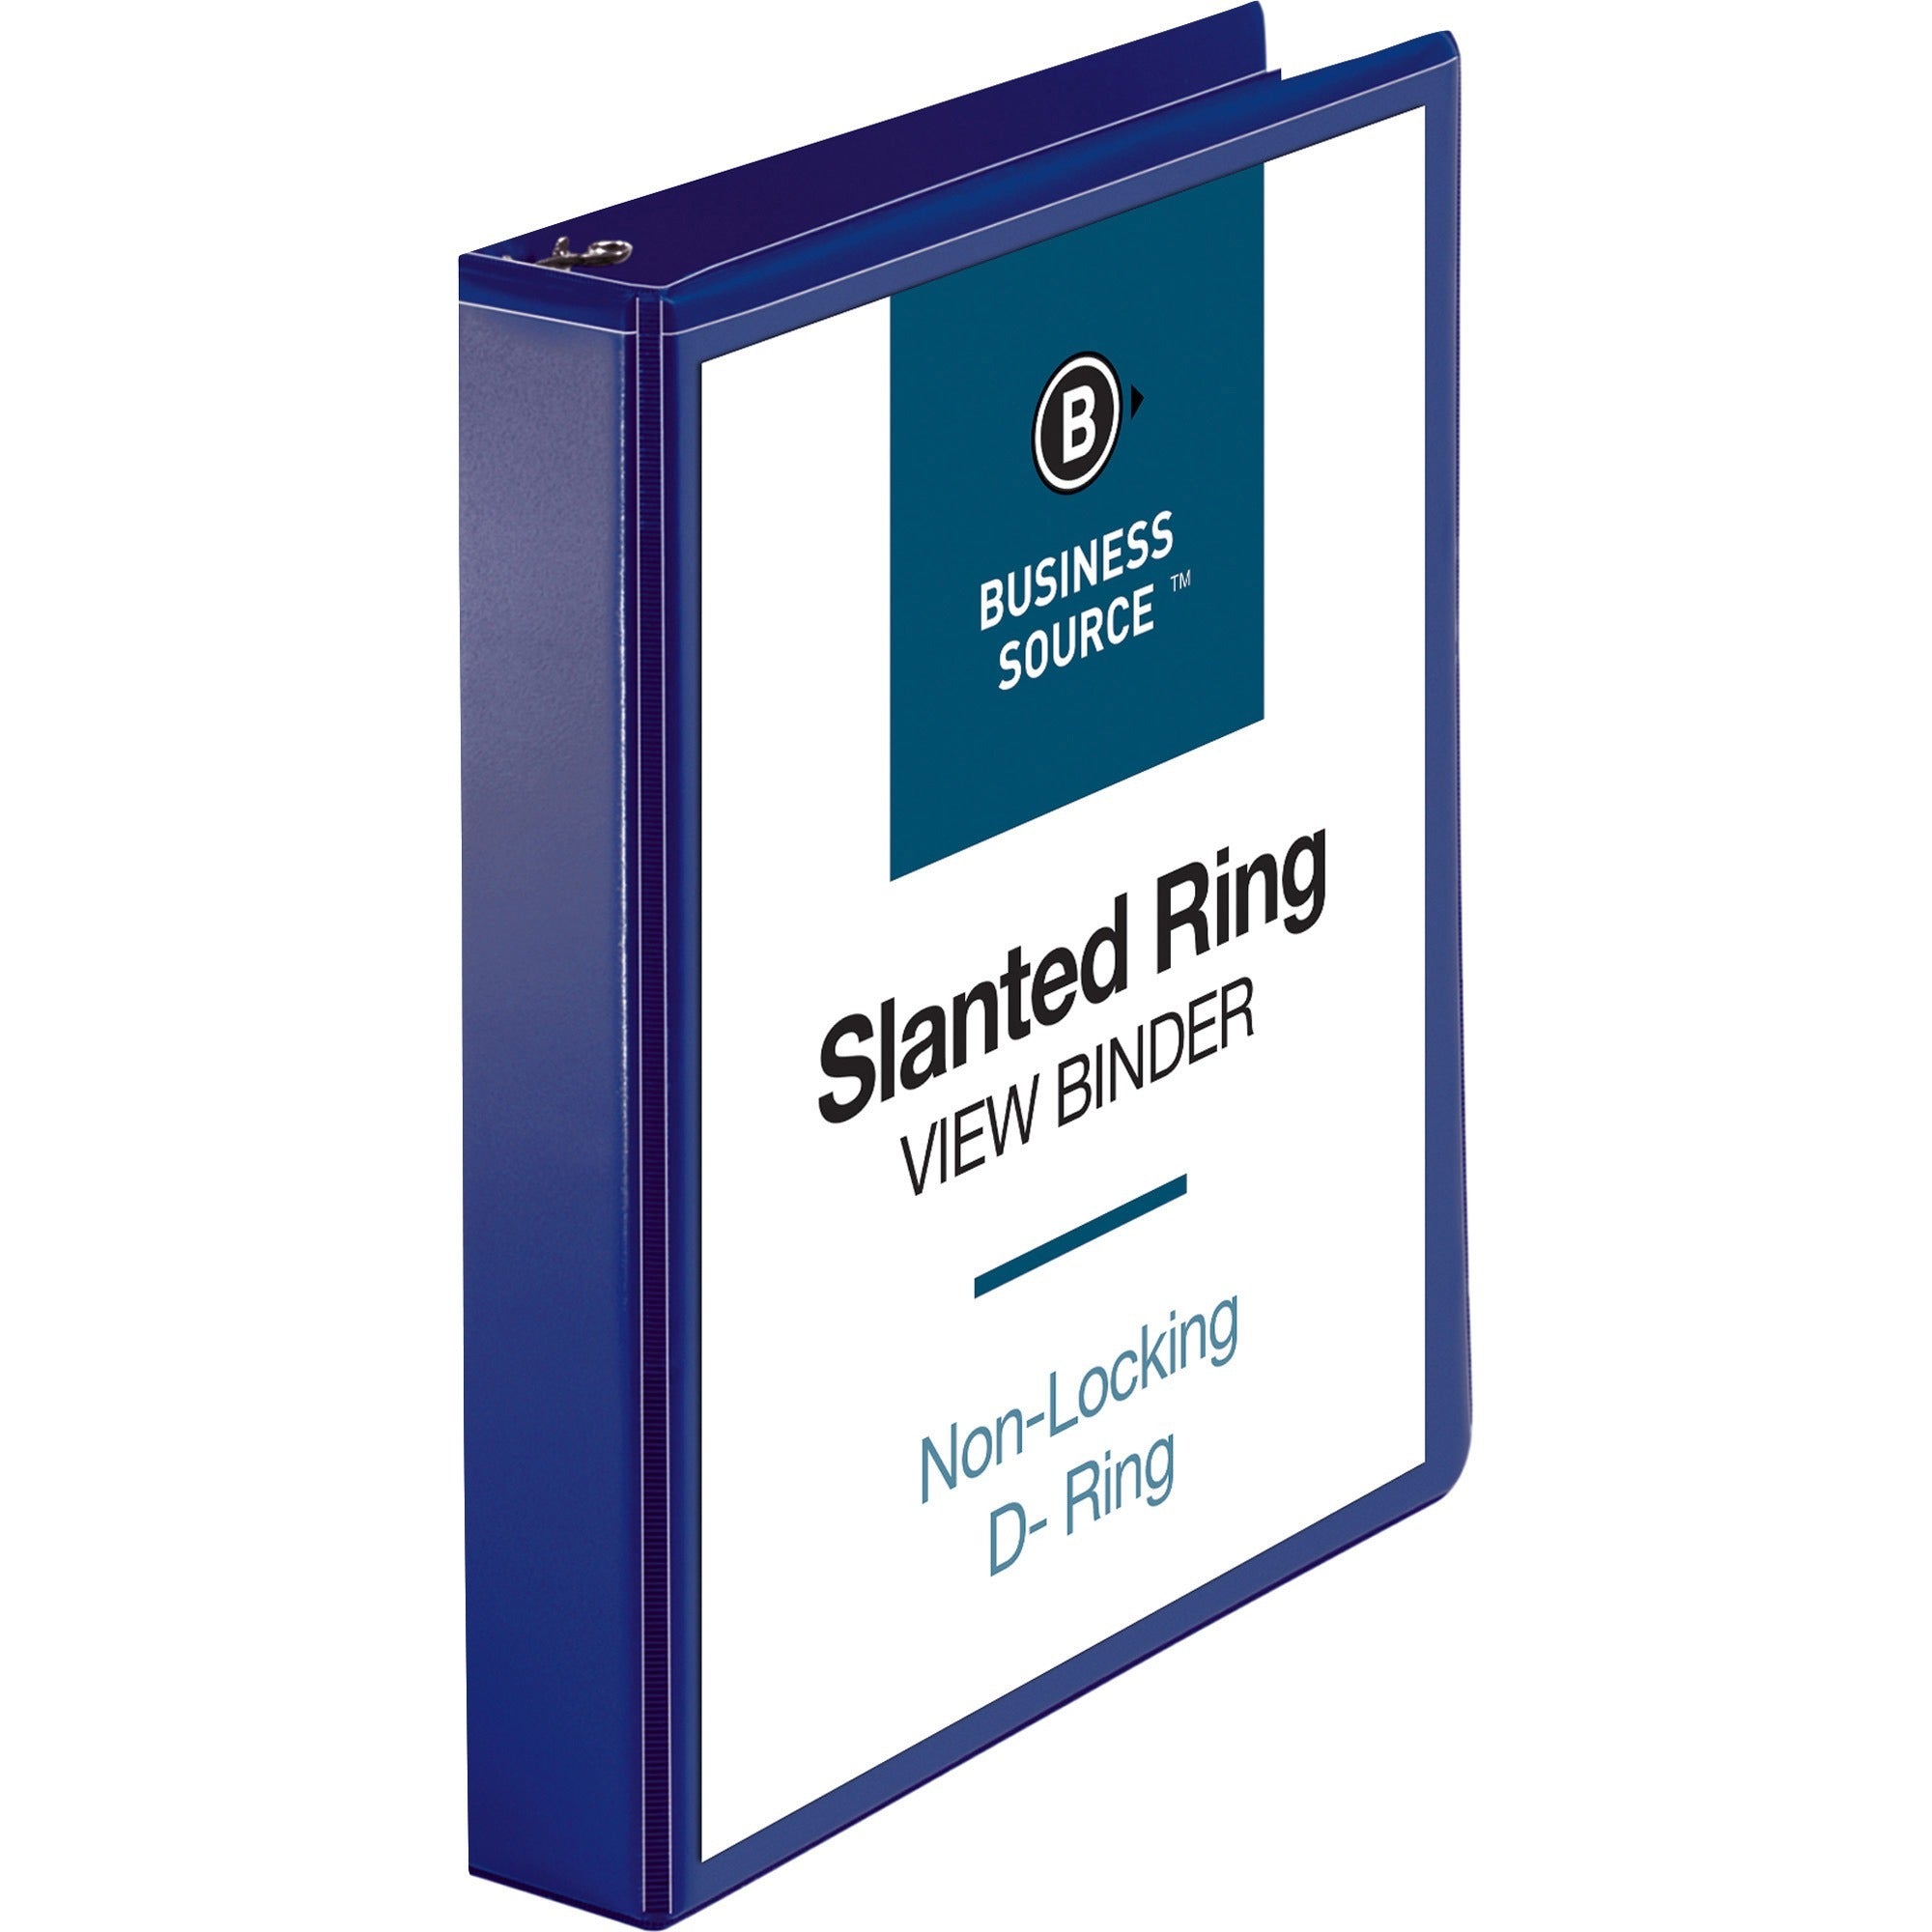 business-source-d-ring-view-binder-1-1-2-binder-capacity-slant-d-ring-fasteners-internal-pockets-navy-clear-overlay-labeling-area-lay-flat-pocket-1-each_bsn28453 - 1